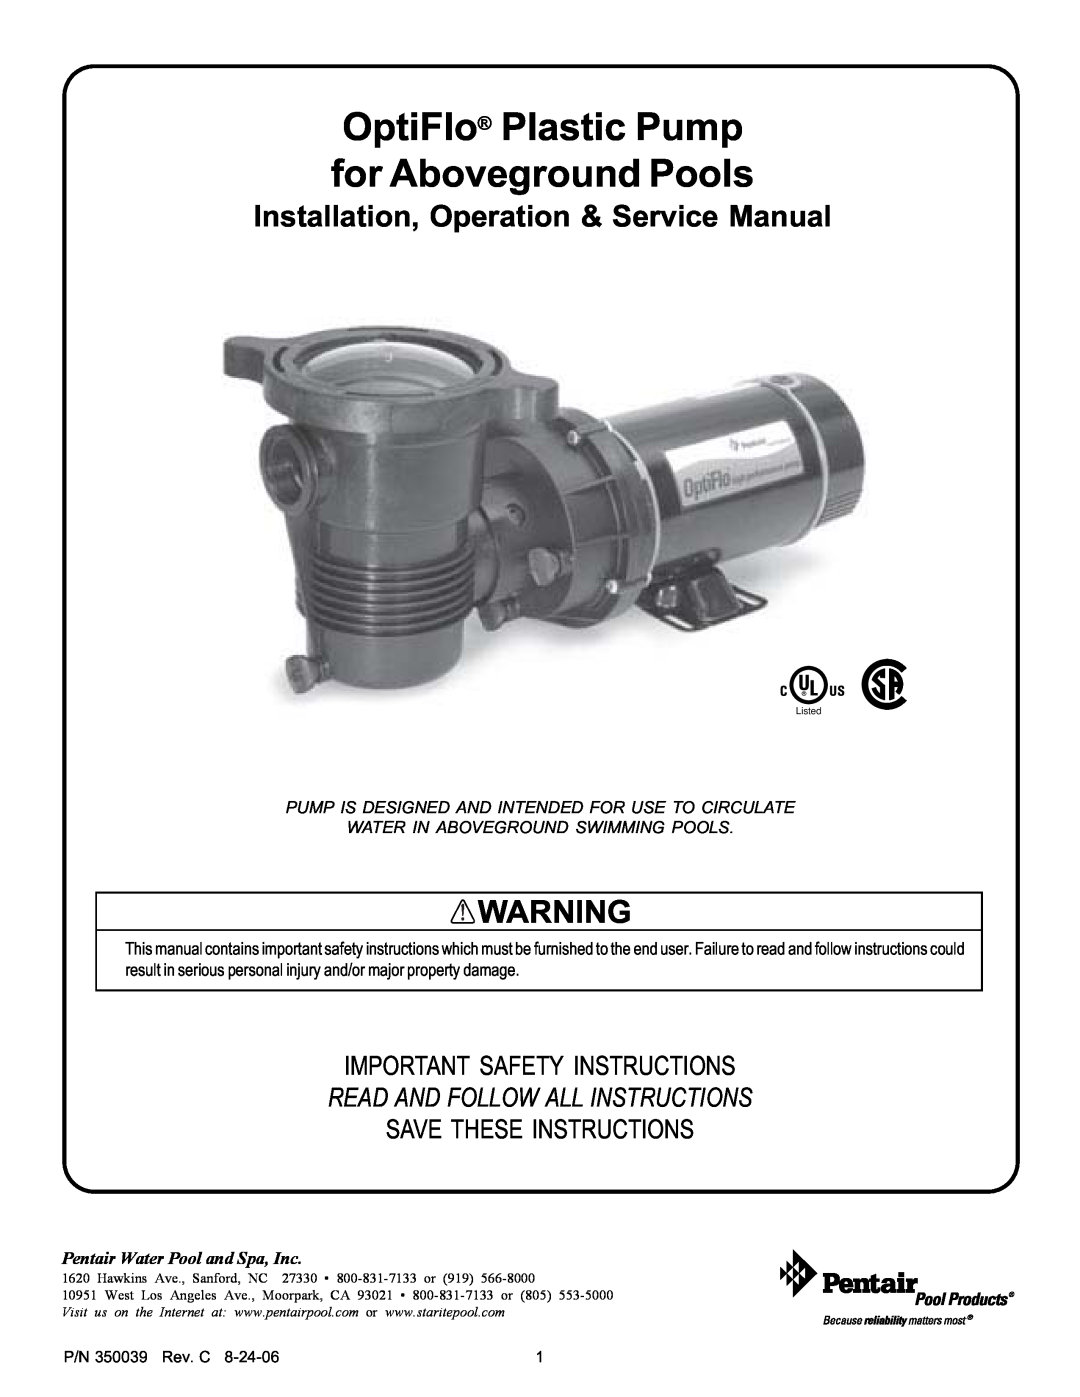 Pentair 4HP-VD - 3' STD service manual OptiFlo Plastic Pump for Aboveground Pools, Important Safety Instructions 